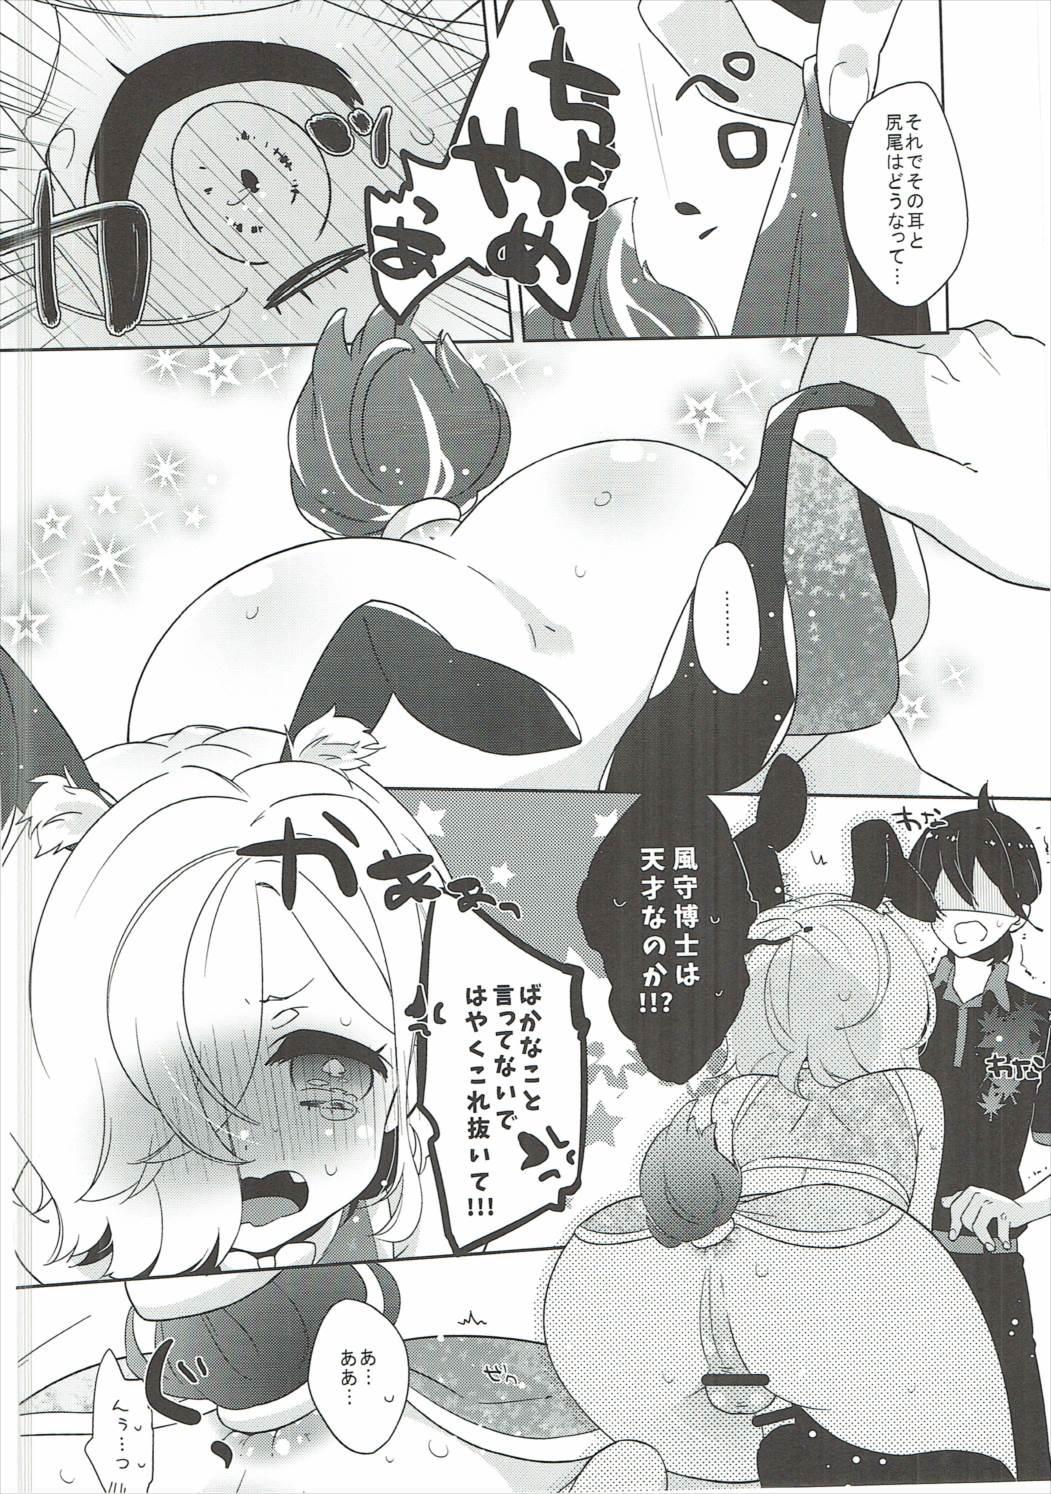 Candid Usamimi x China=Hearts - Un go Perfect Teen - Page 7